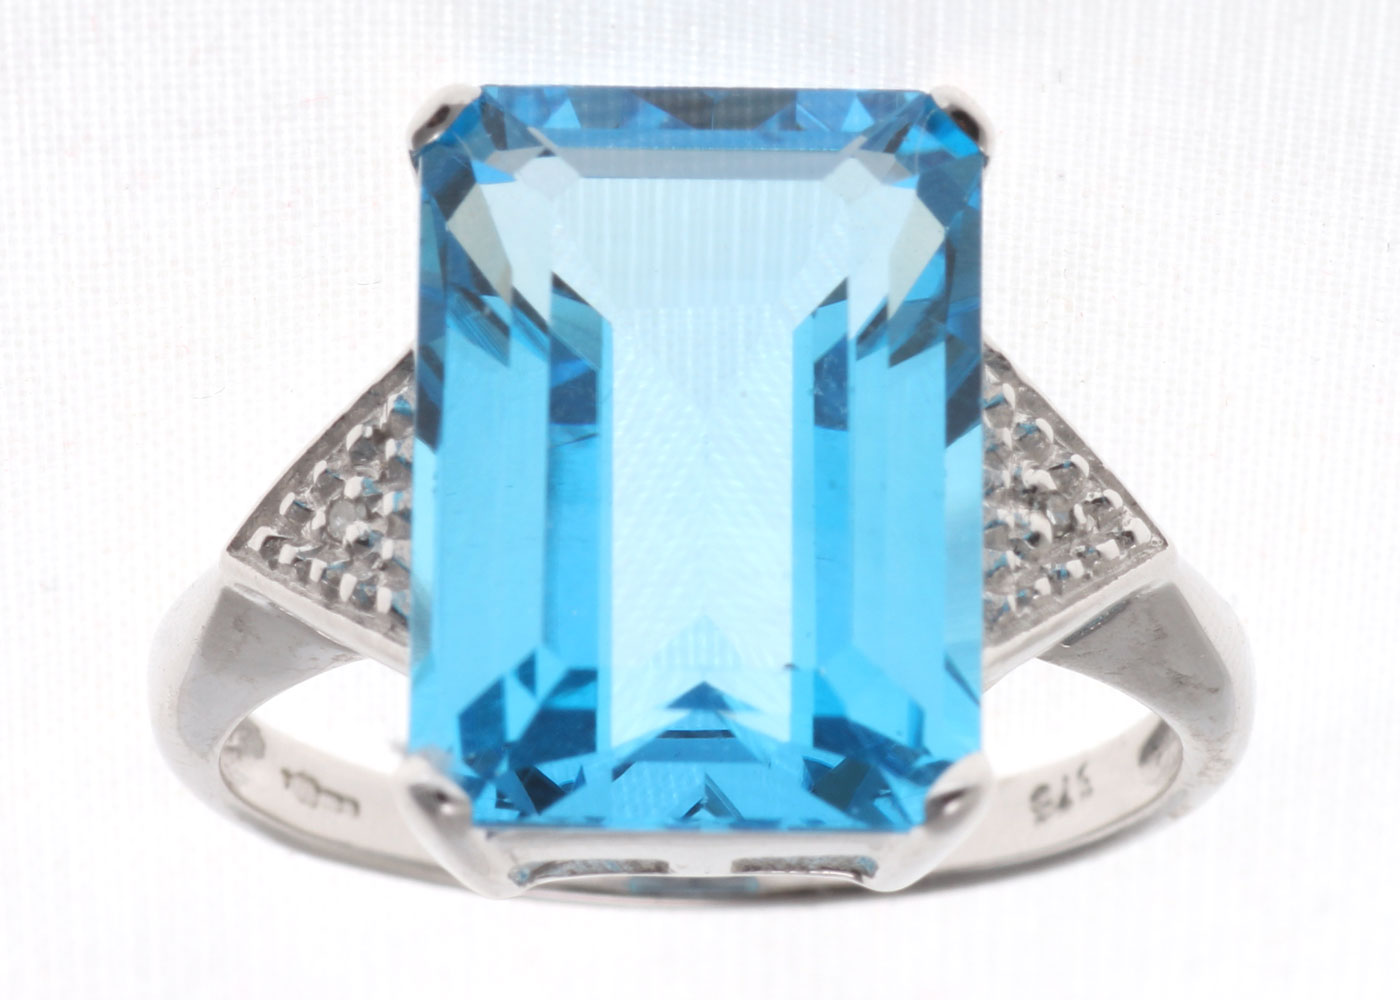 9ct White Gold Diamond And Blue Topaz Ring 8.25 Carats - Image 6 of 6